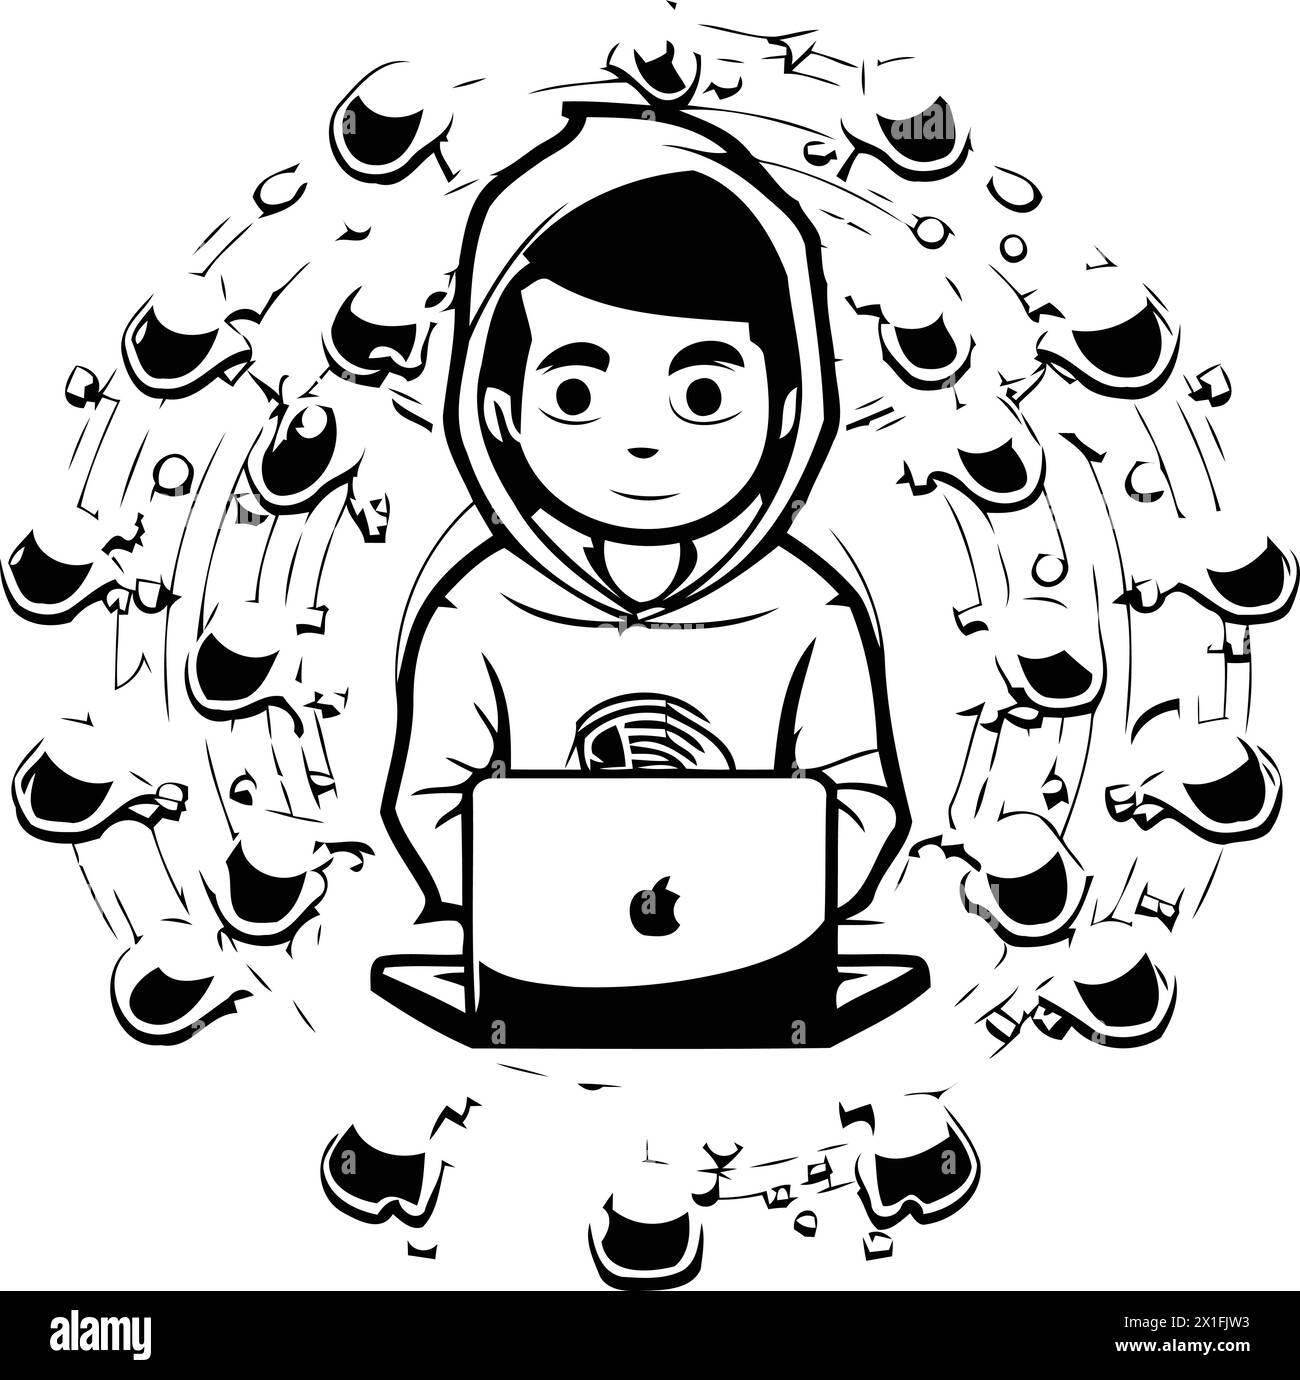 Vector illustration of a boy wearing a hoodie and working on a laptop Stock Vector